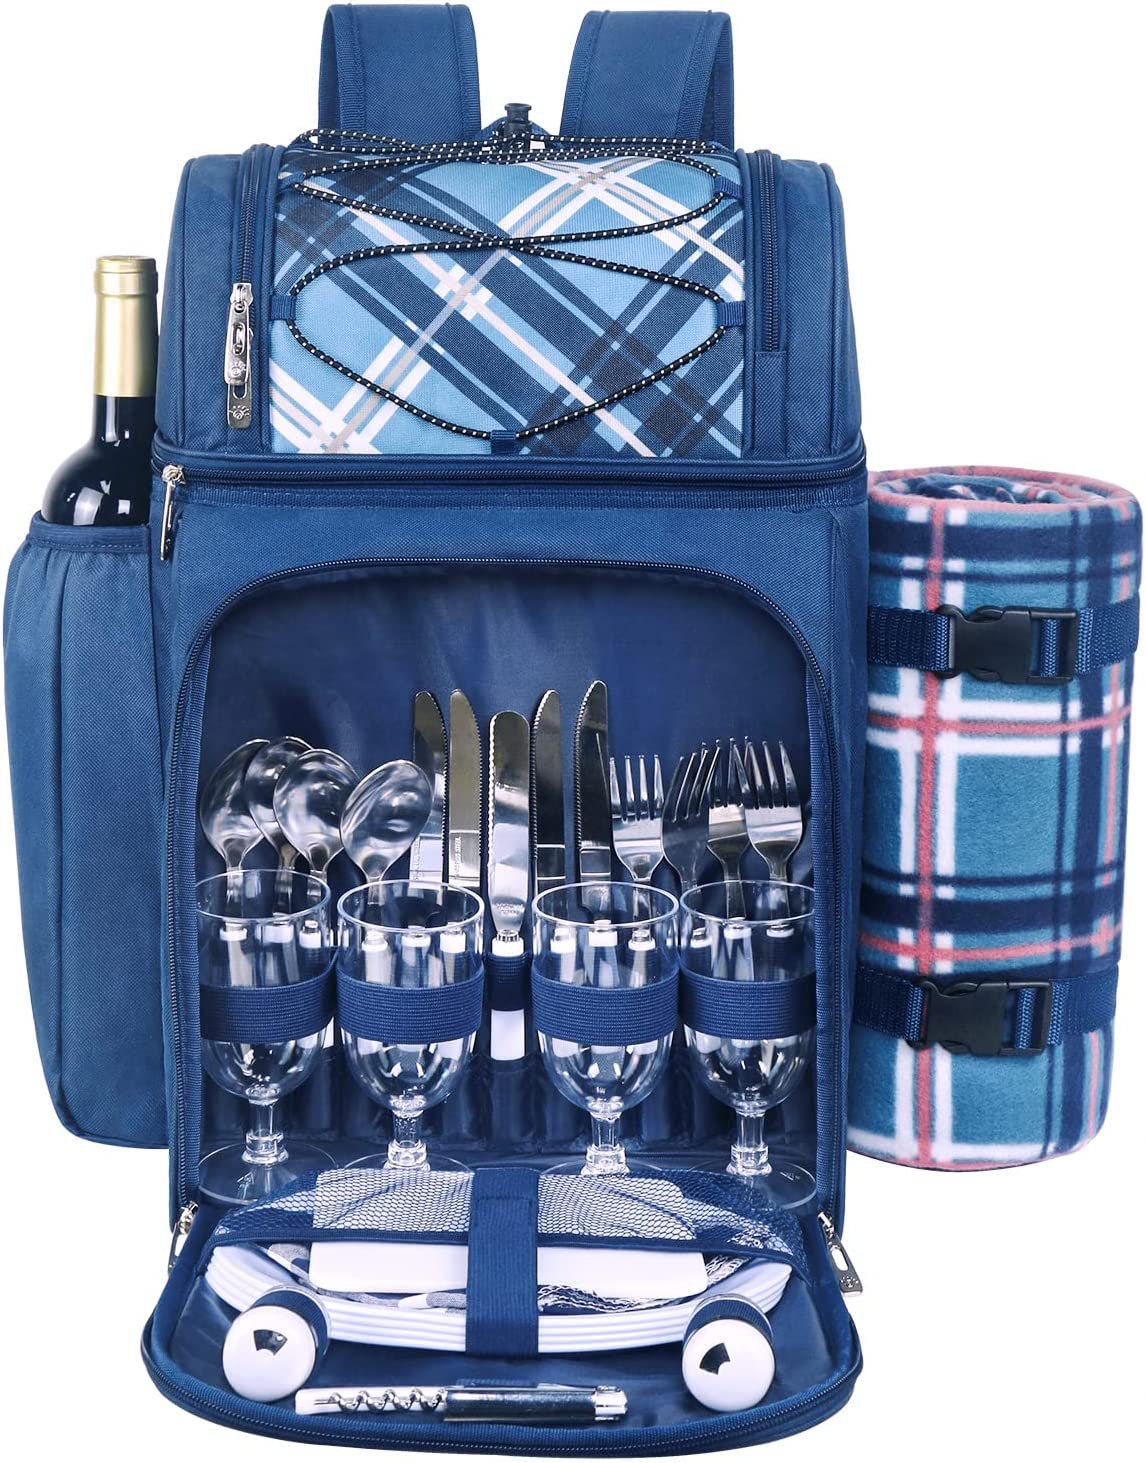 Family Picnic Backpack for 4 - Complete Picnic Bag for 4 with Folding Table, Insulated Cooler Compartment, Wine Holder, Waterproof Picnic Blanket and